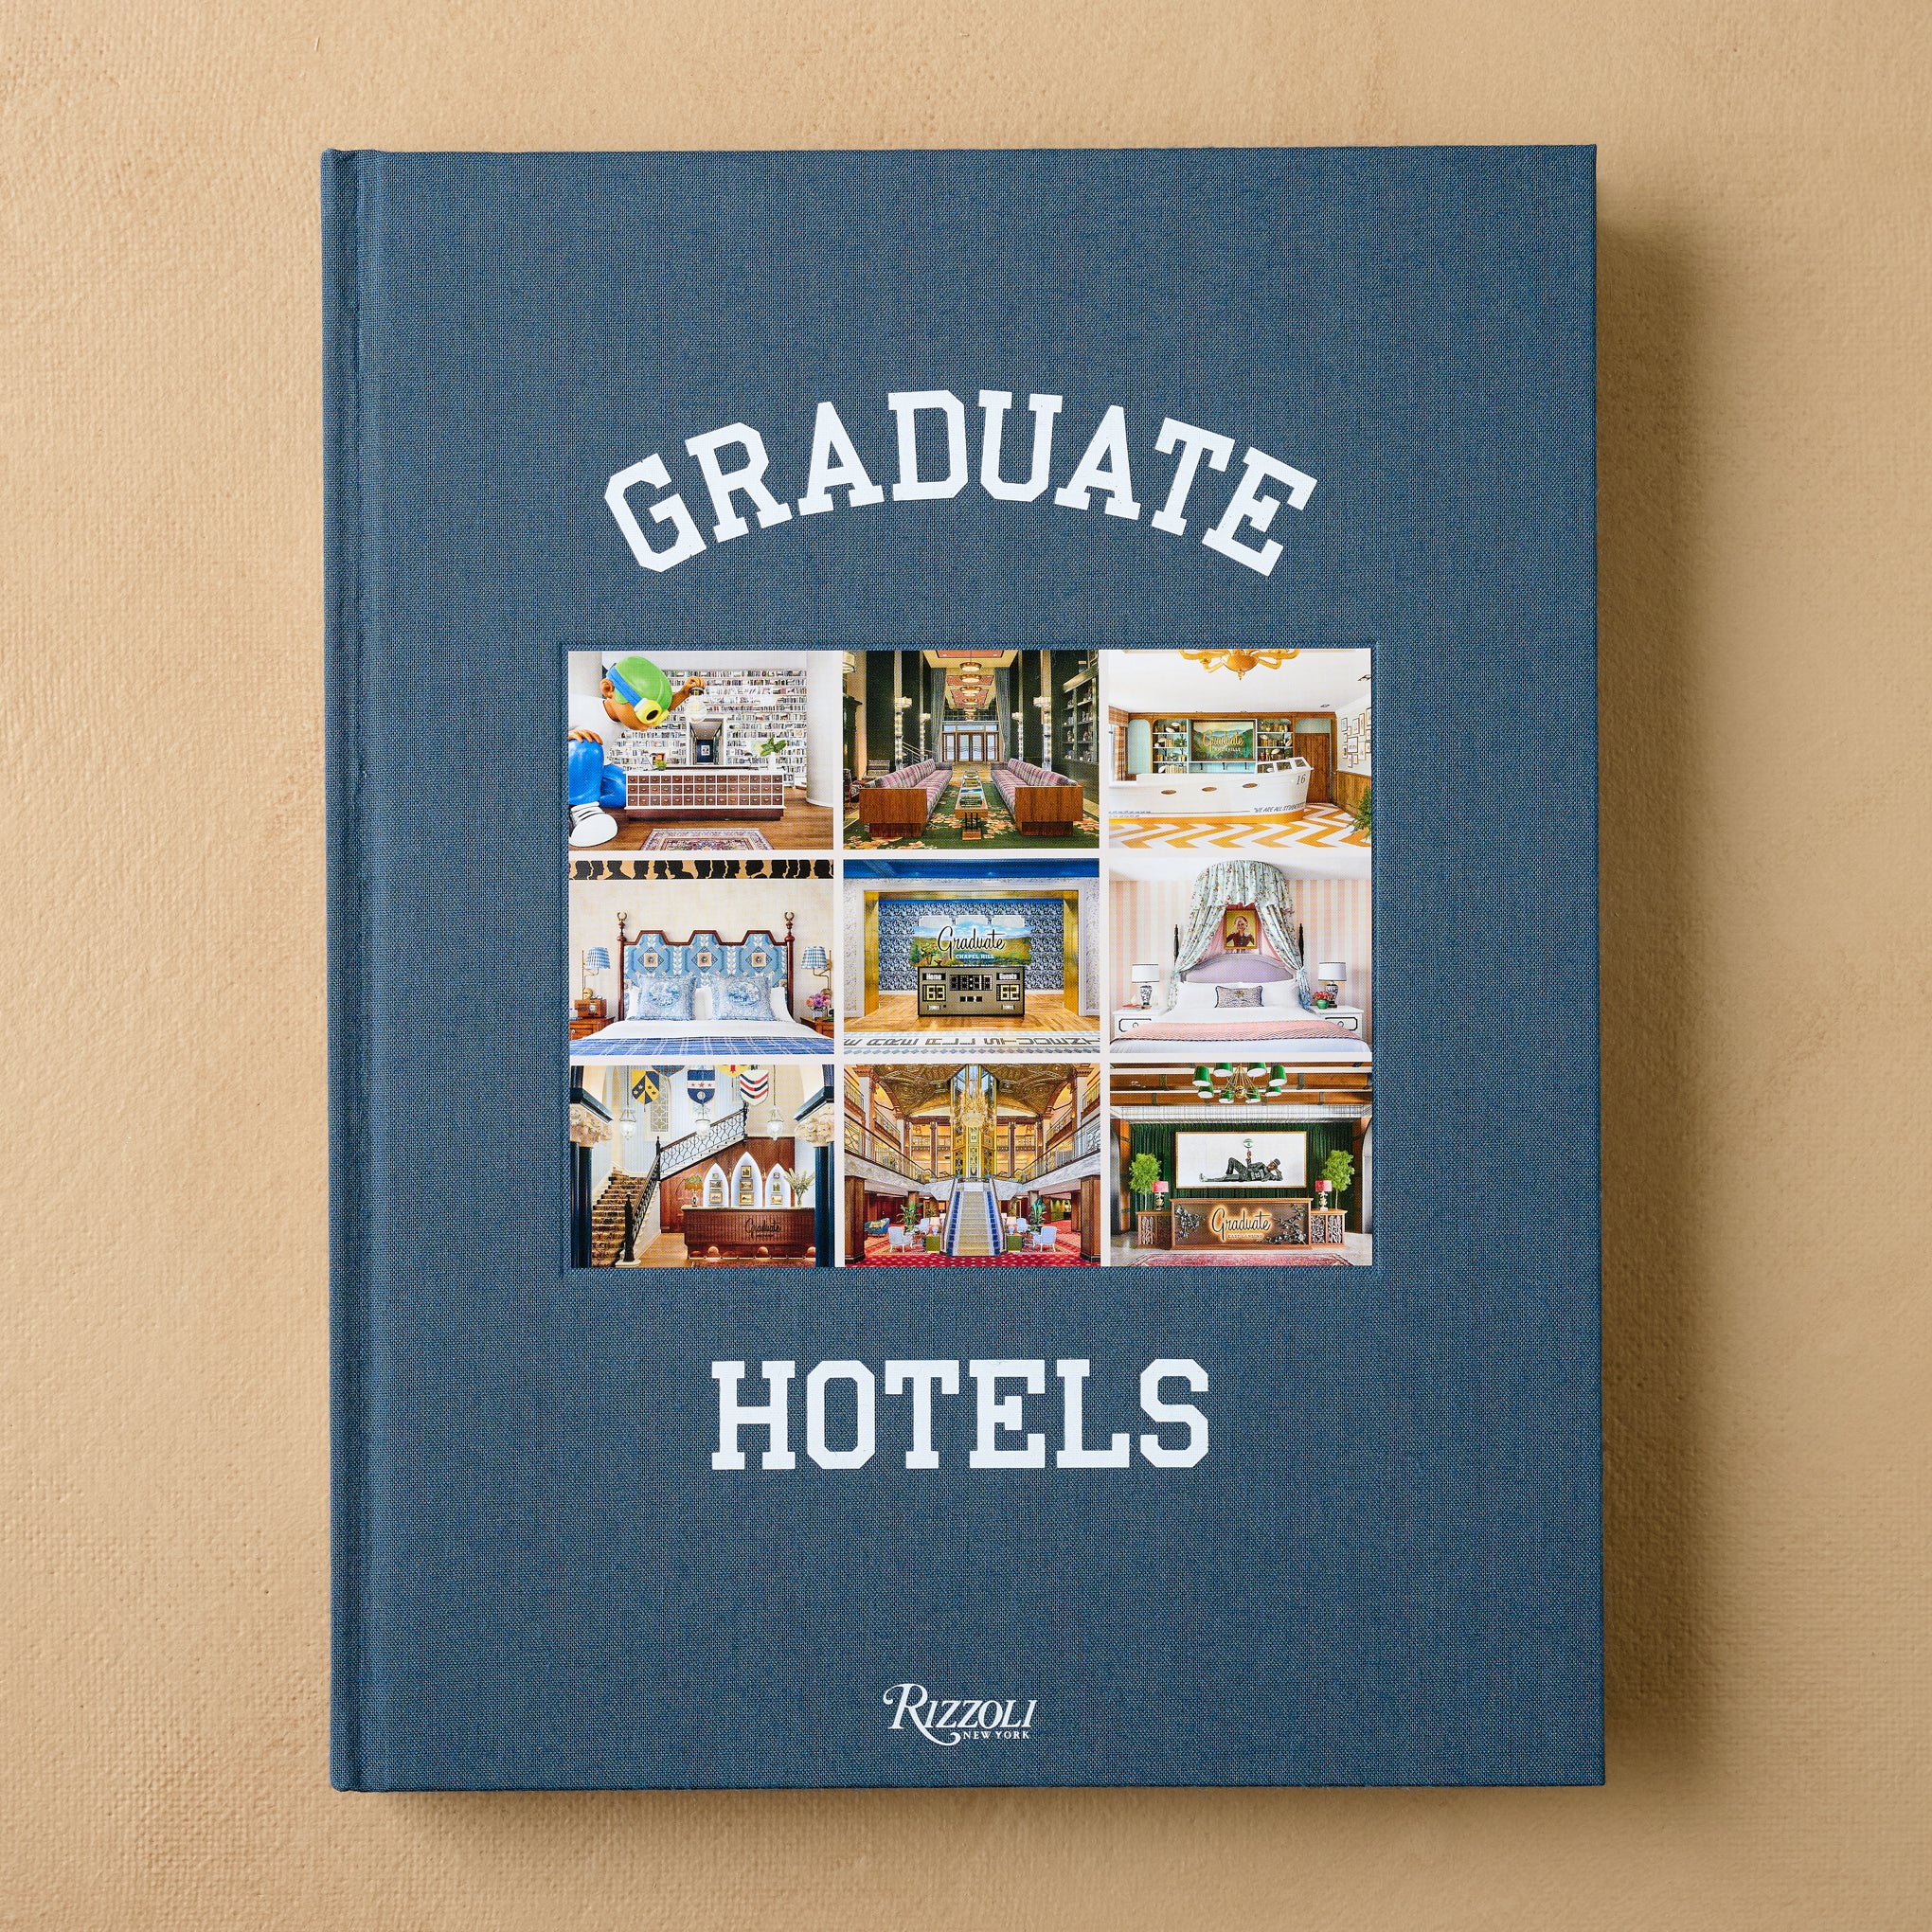 Graduate Hotels Coffee Table Book $55.00